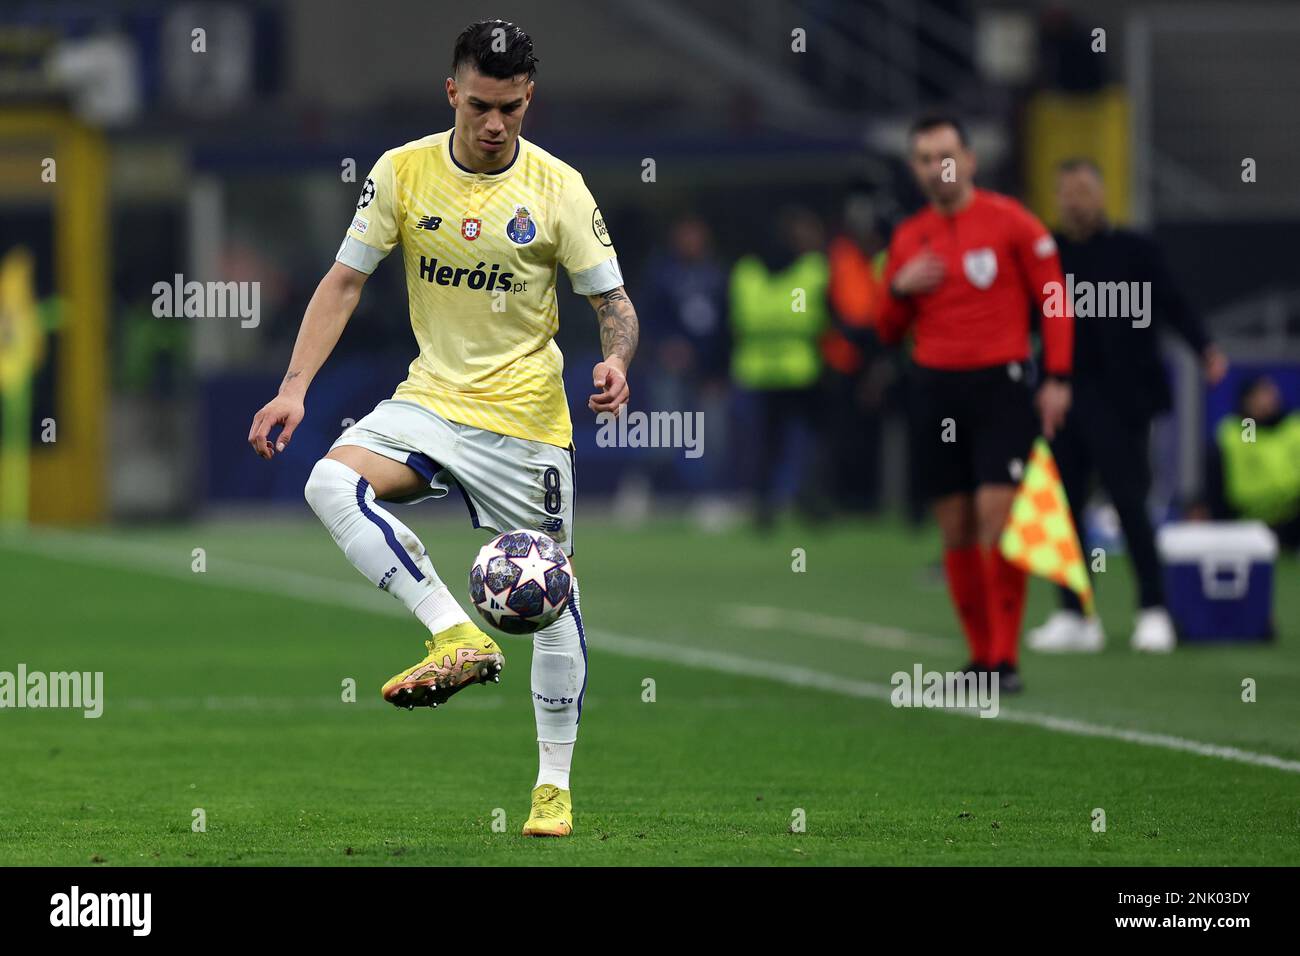 Milano Italy . February 22, 2023, Mateus Uribe of Fc Porto controls the ball during the Uefa Champions League round of 16 first leg match between Fc Internazionale and Fc Porto at Stadio Giuseppe Meazza on February 22, 2023 in Milano Italy . Stock Photo